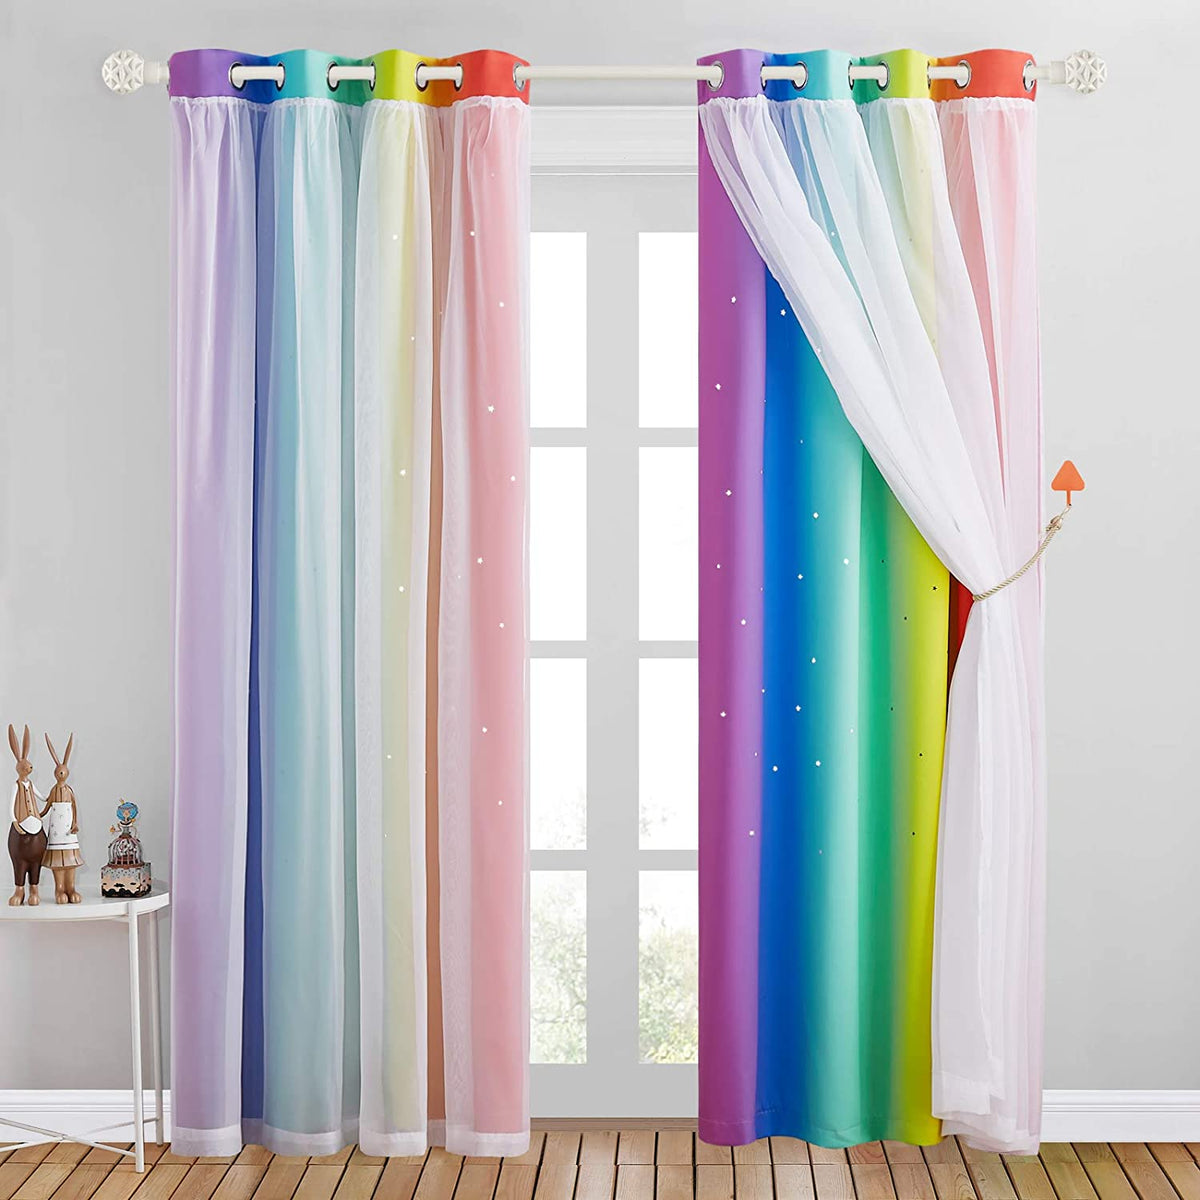 Blackout Rainbow And Star Cut Out Curtains With Sheer Curtain Overlay 2 Panels Kgorge